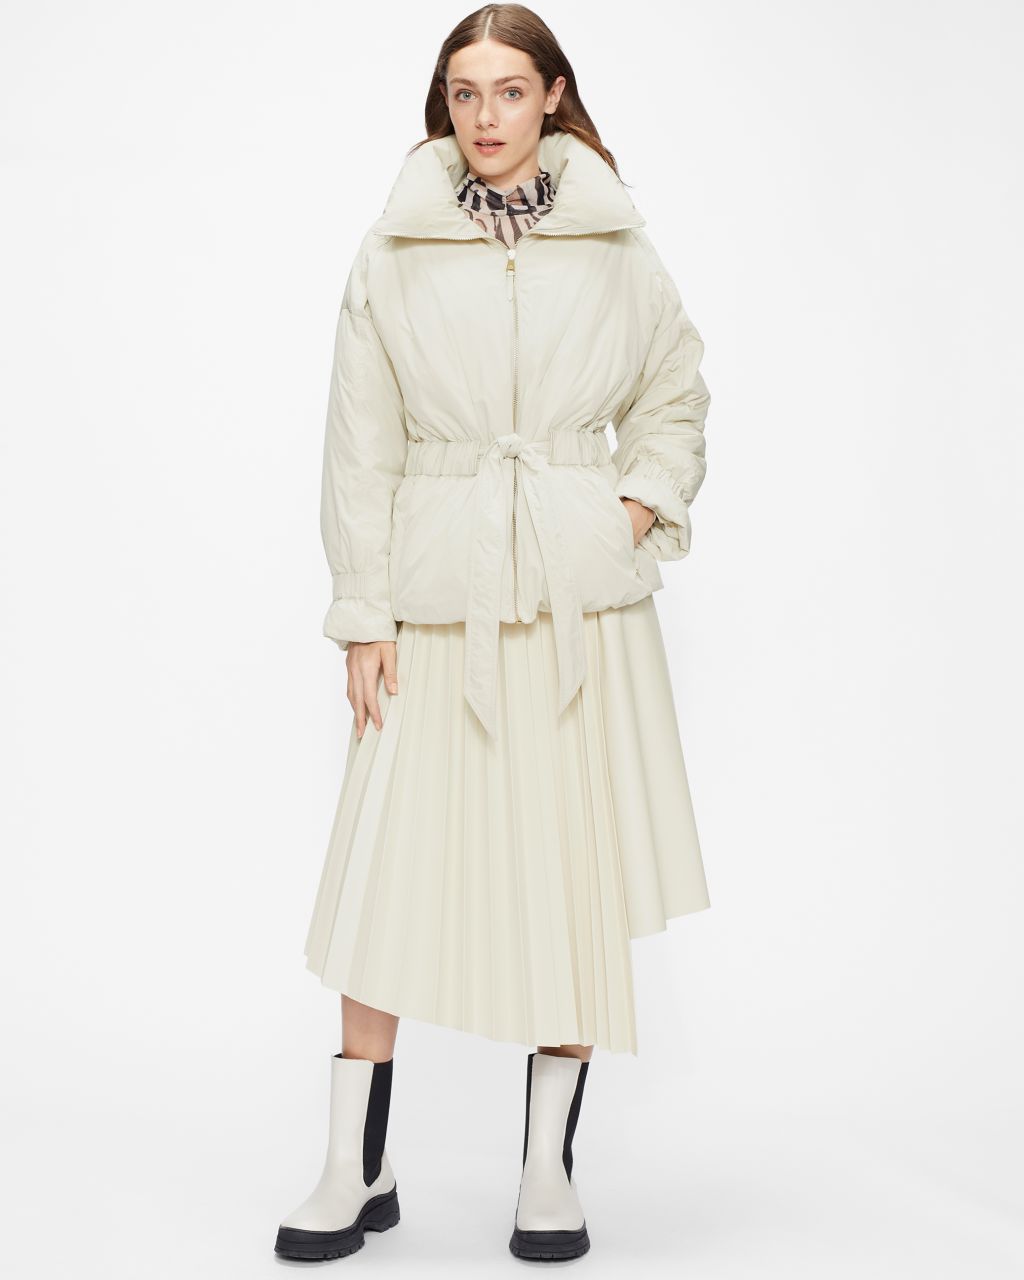 Ted Baker Women's Belted Puffer Jacket in White, Alexiii